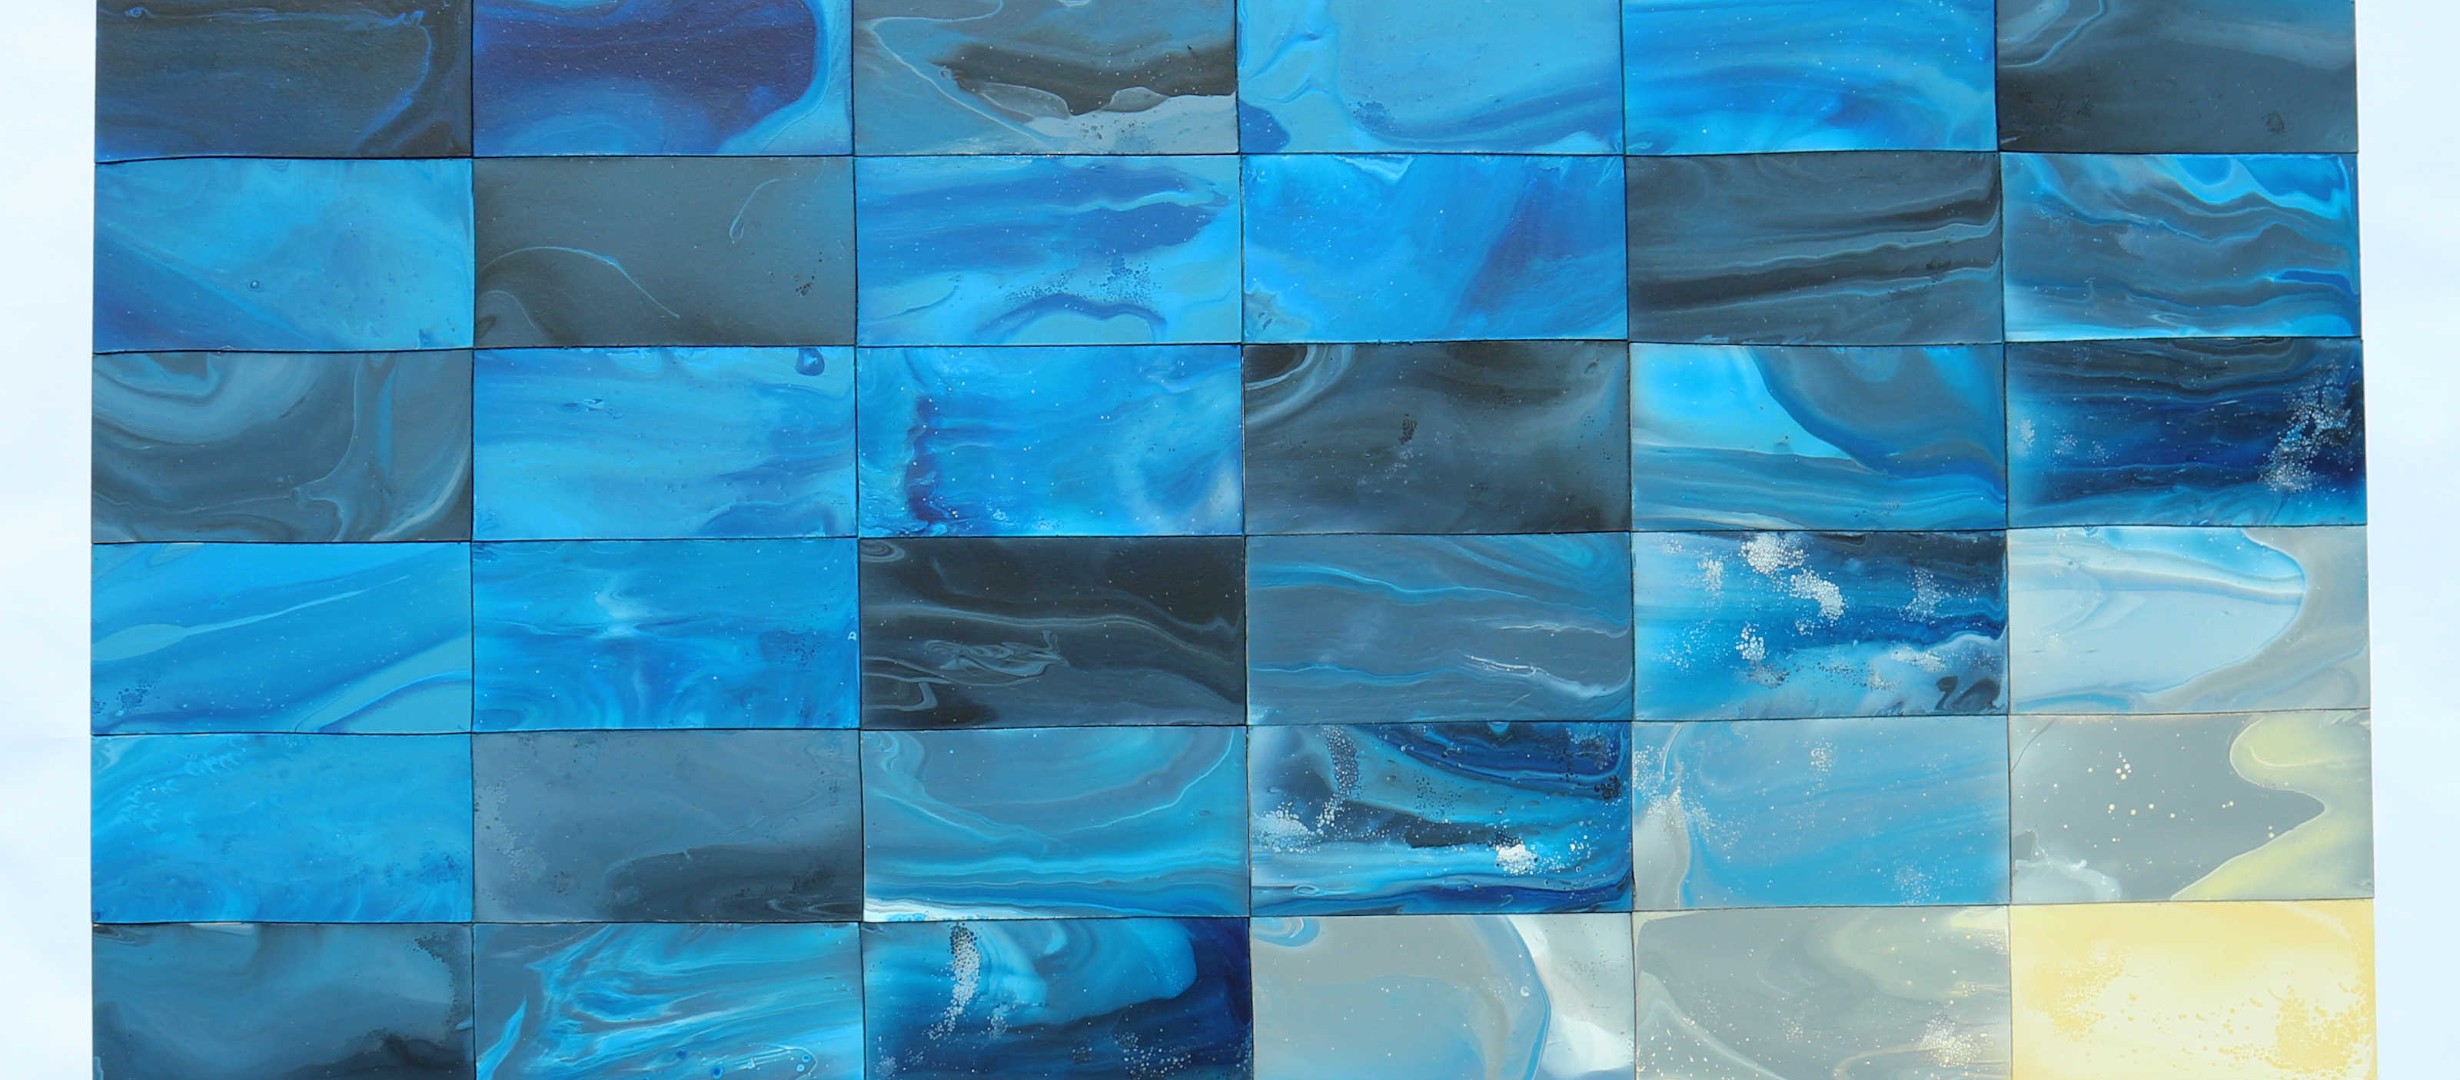 An abstract painting made up of thirty-six smaller rectangles. The rectangles are arranged in diagonal lines of colour moving from top left to bottom right in shades of blue, grey and then yellow, to represent waves moving towards the shore